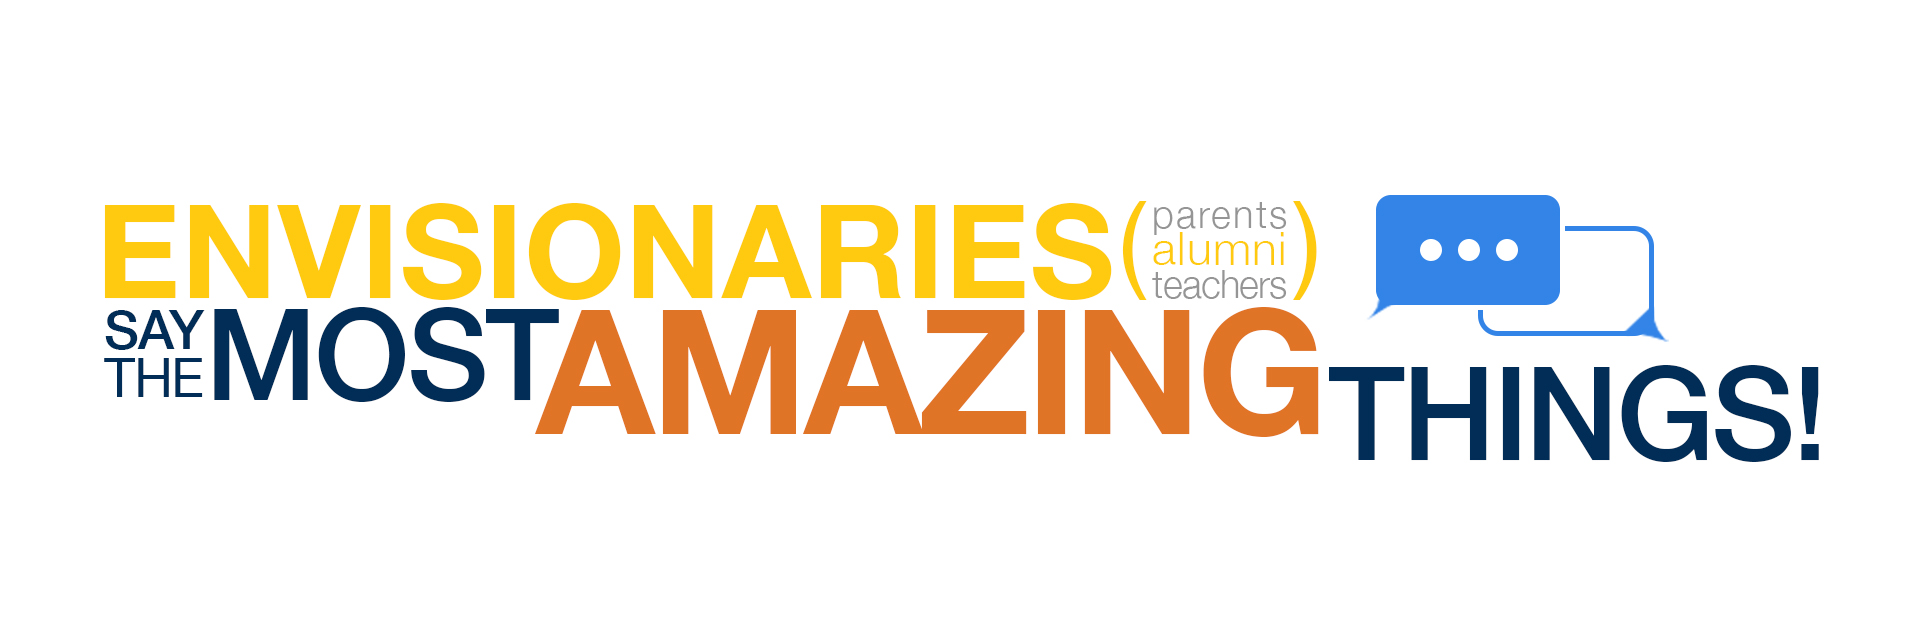 Envision Alumni, Teachers & Parents say the Most AMAZING things!